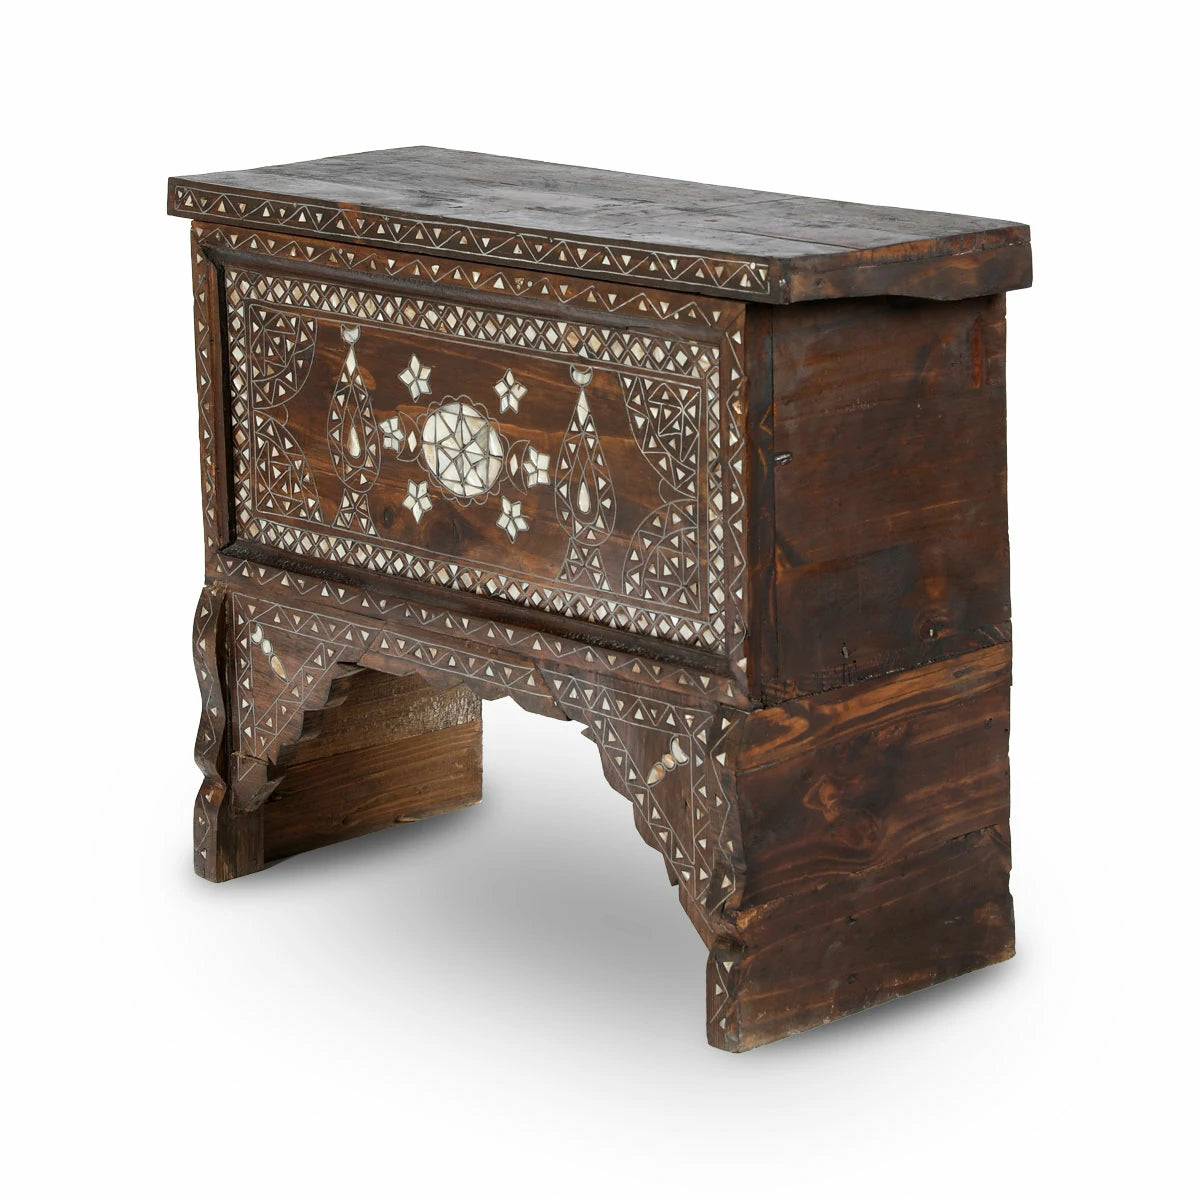 Antique Mahogany Wood Syrian Chest Console Table